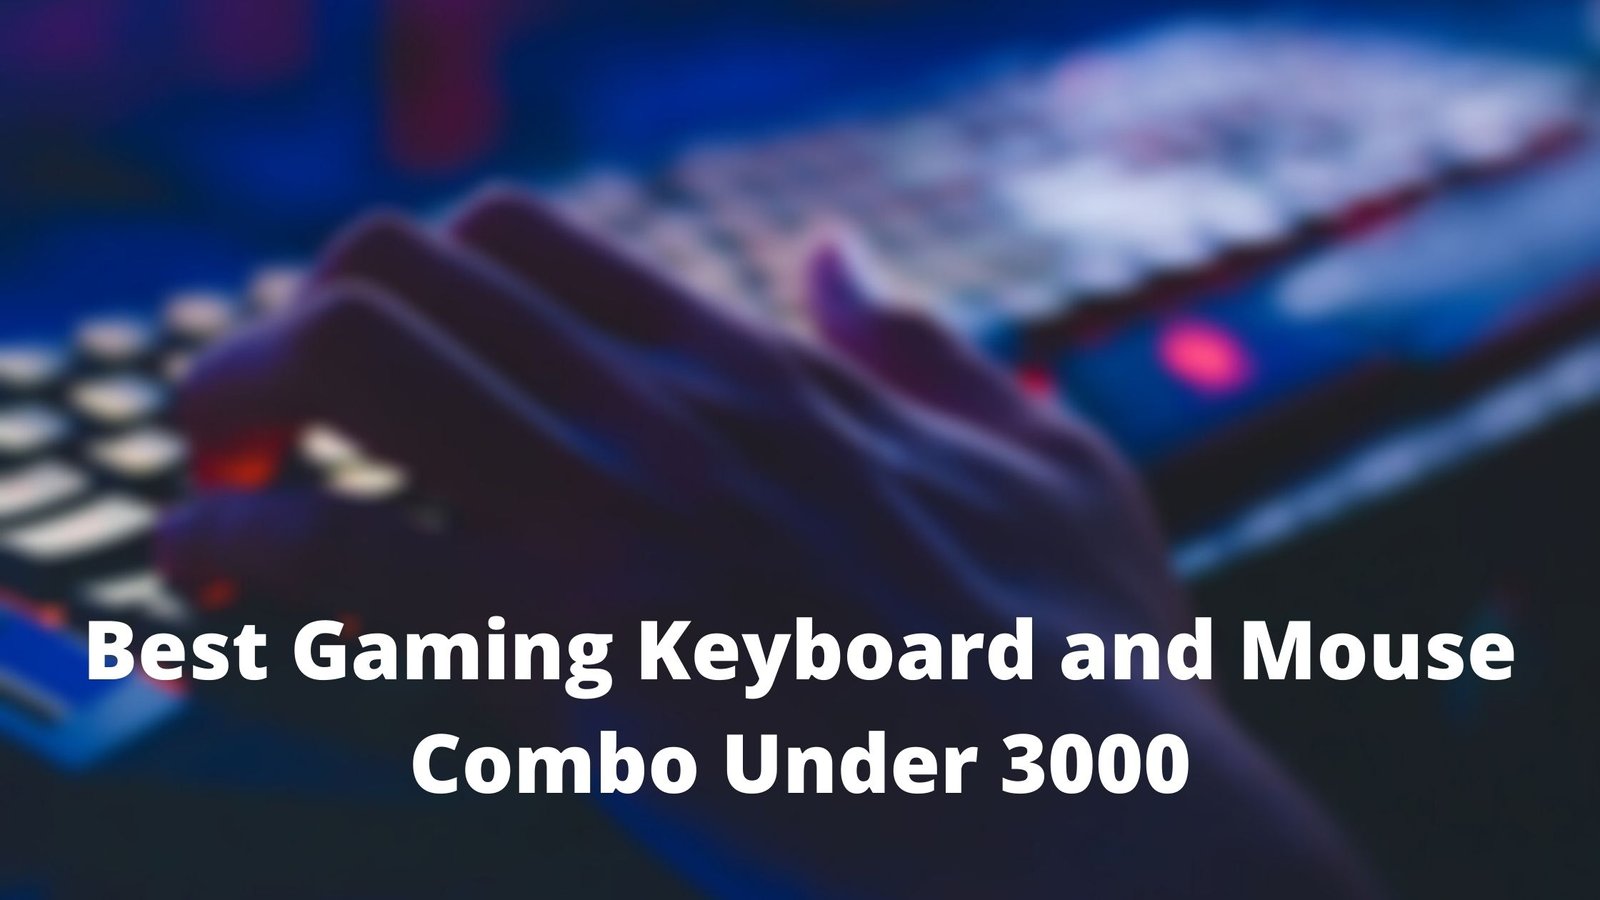 Best Gaming Keyboard and Mouse Combo Under 3000